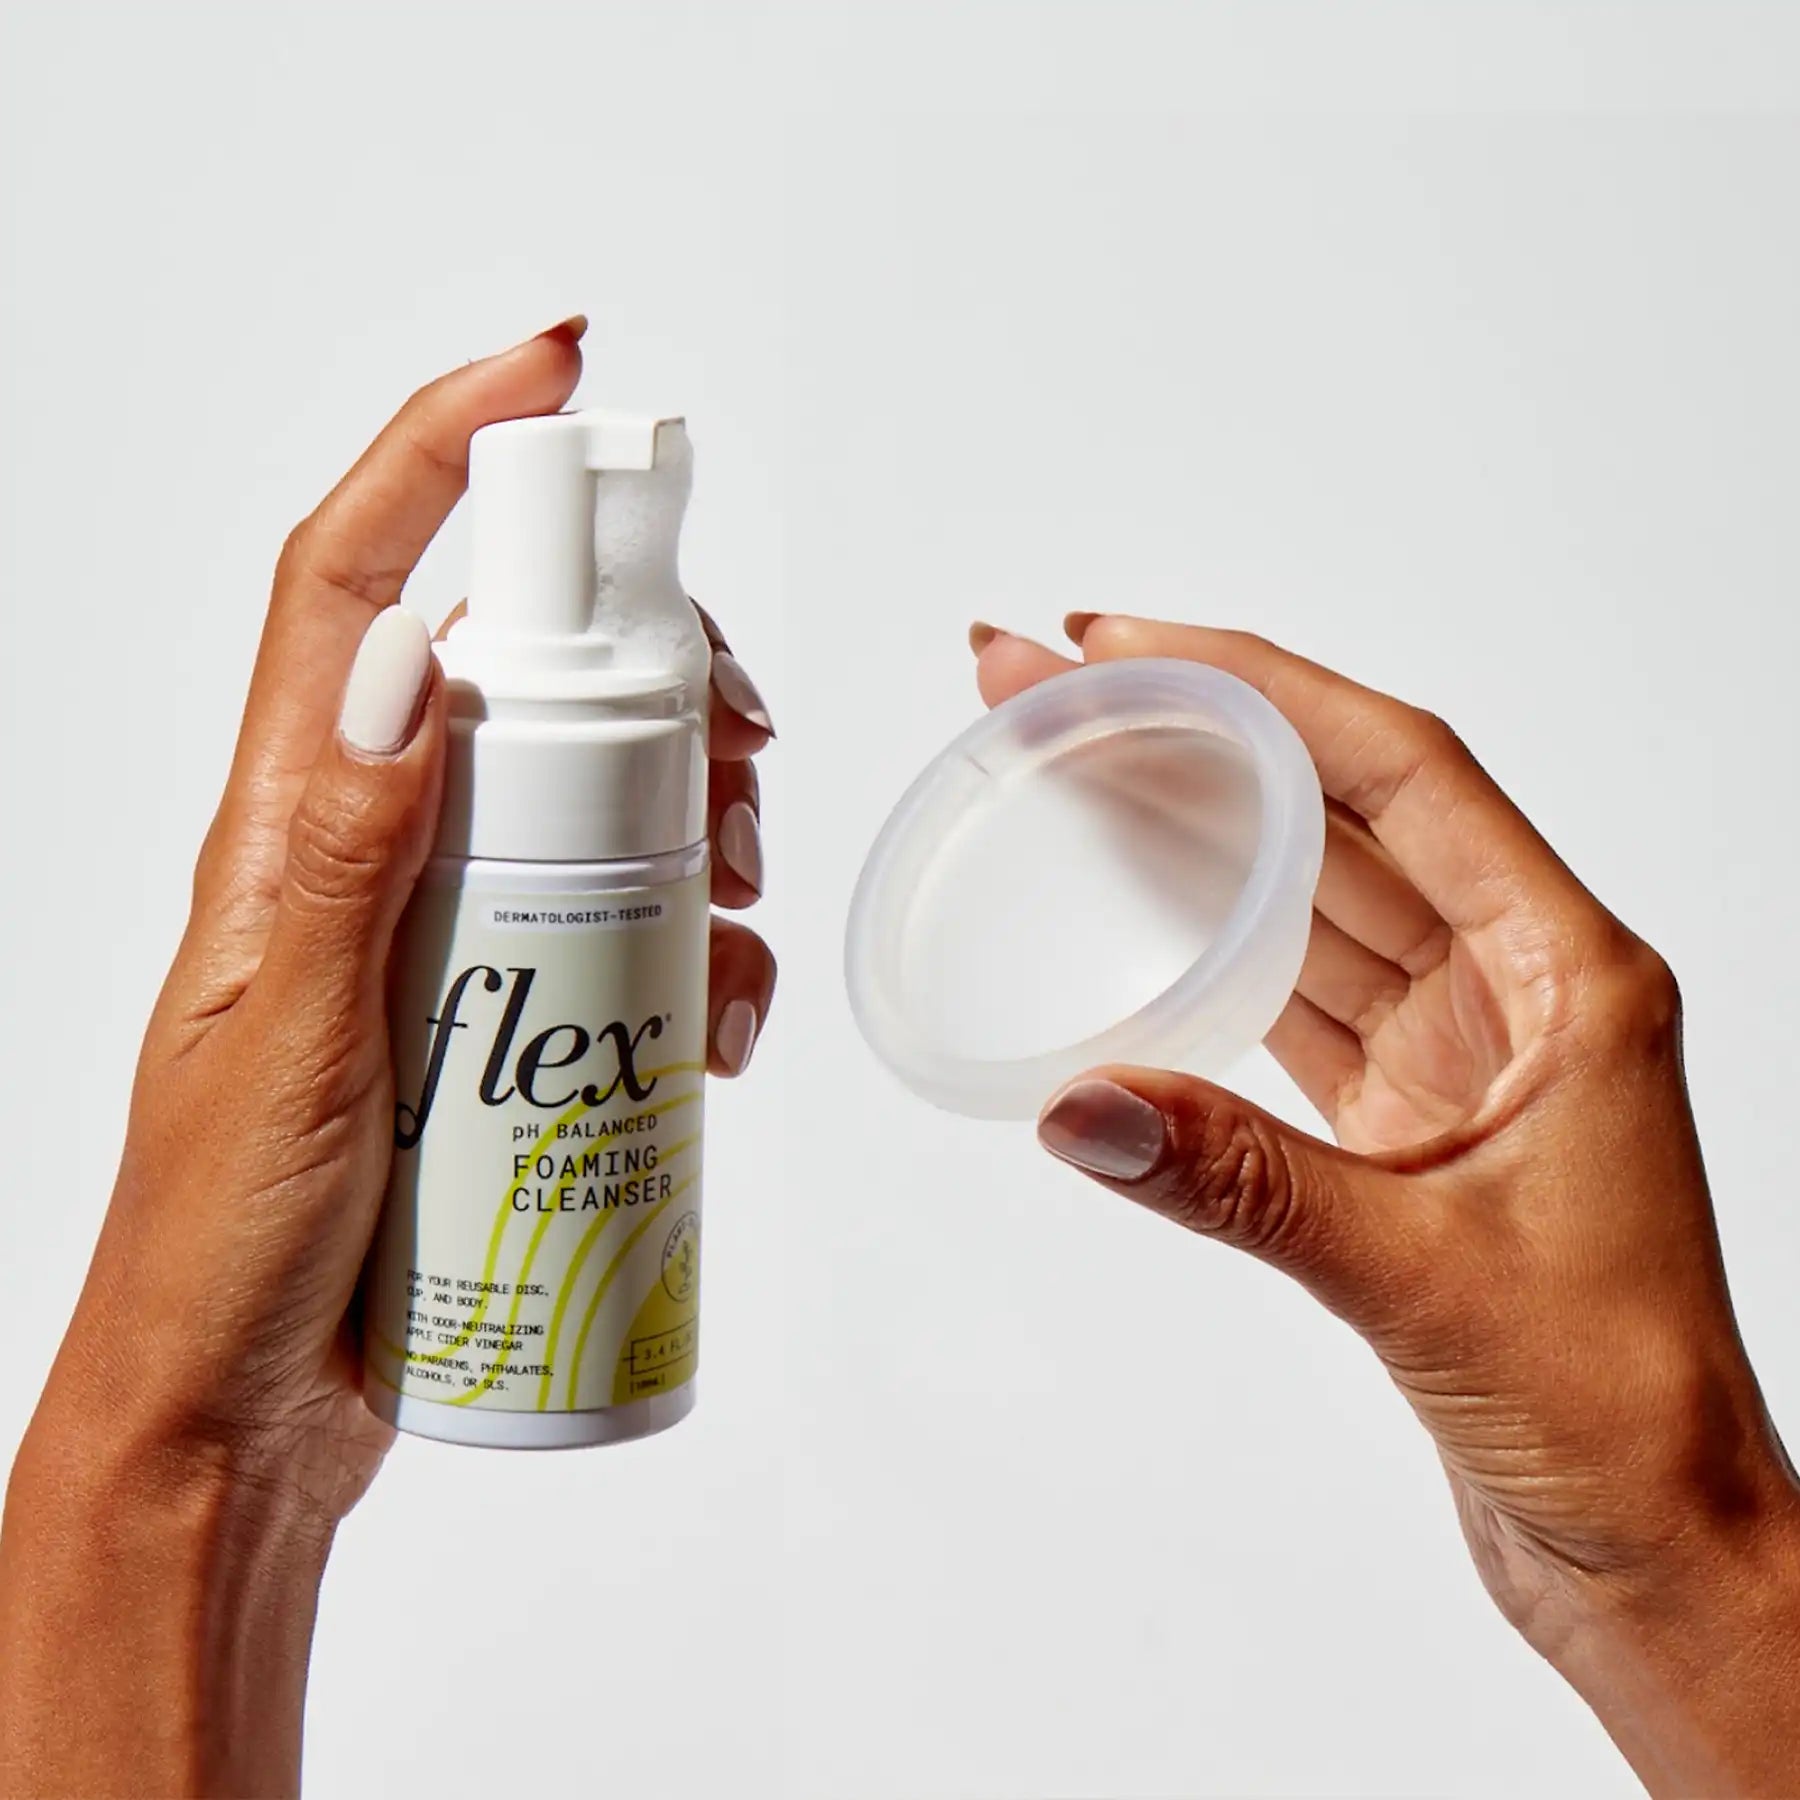 A person holding a bottle of Flex Foaming Cleanser and a reusable Menstrual Disc